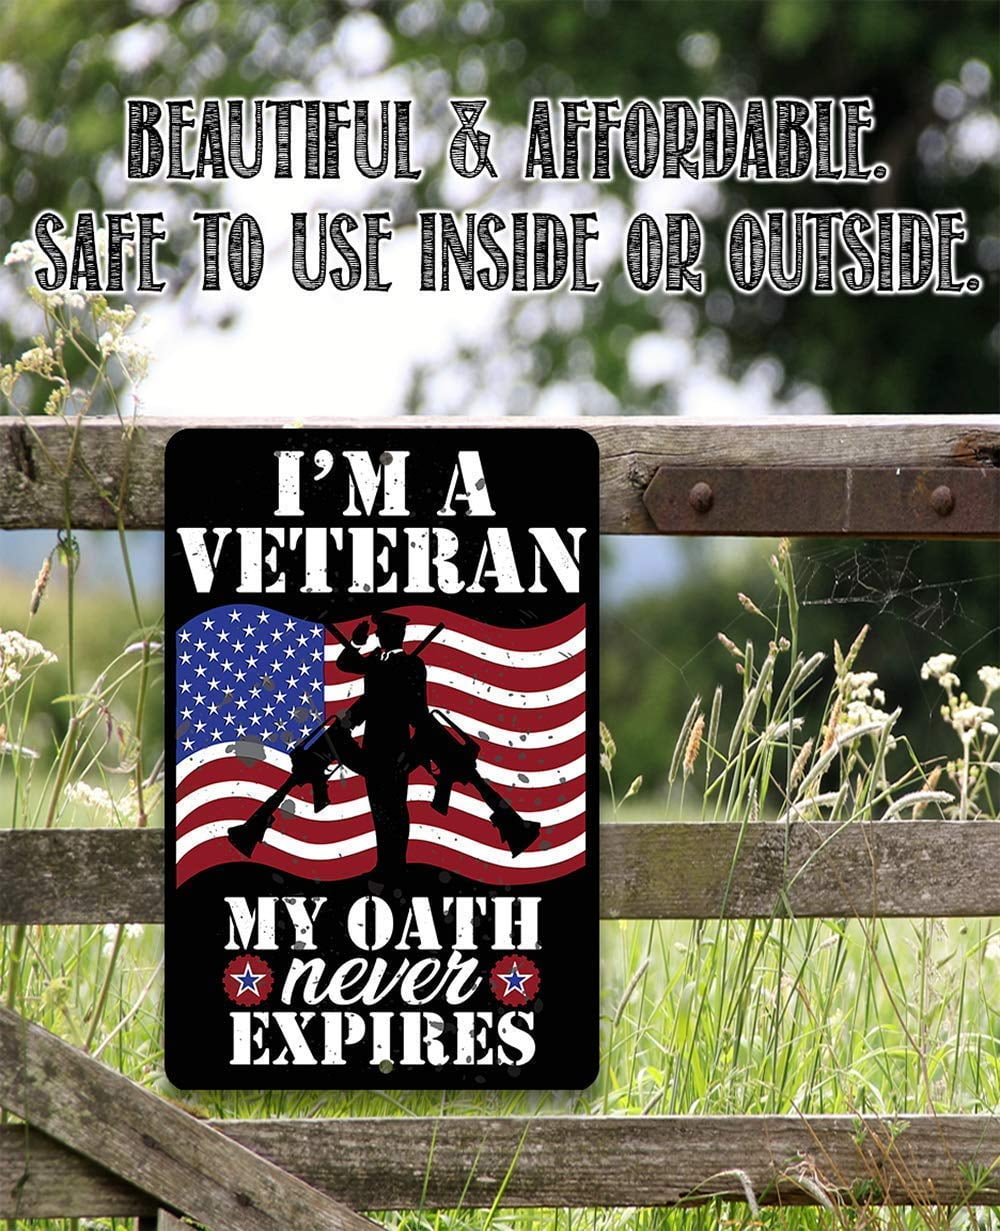 8 x 12 Durable Metal Sign Great Gift and Decor for Patriotic Americans I'm A Veteran My Oath Never Expires Metal Sign Use Indoor/Outdoor Military and Soldiers Under $20 